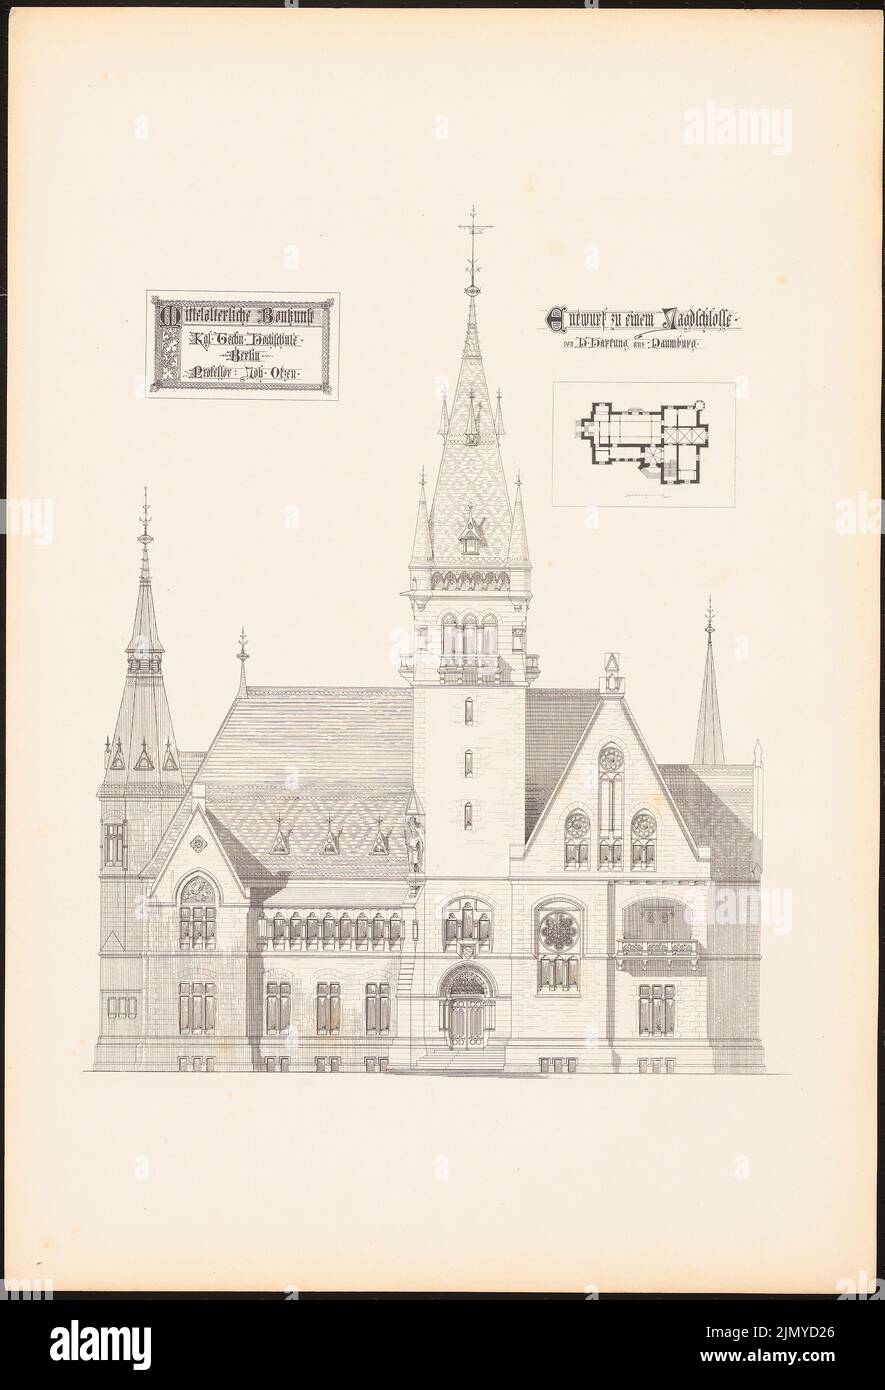 Hartung Hans, hunting lodge. (From: Medieval architecture. Designs by the students of the Royal Technical University of Berlin, ed. Pressure on paper, 55.4 x 37.8 cm (including scan edges) Stock Photo